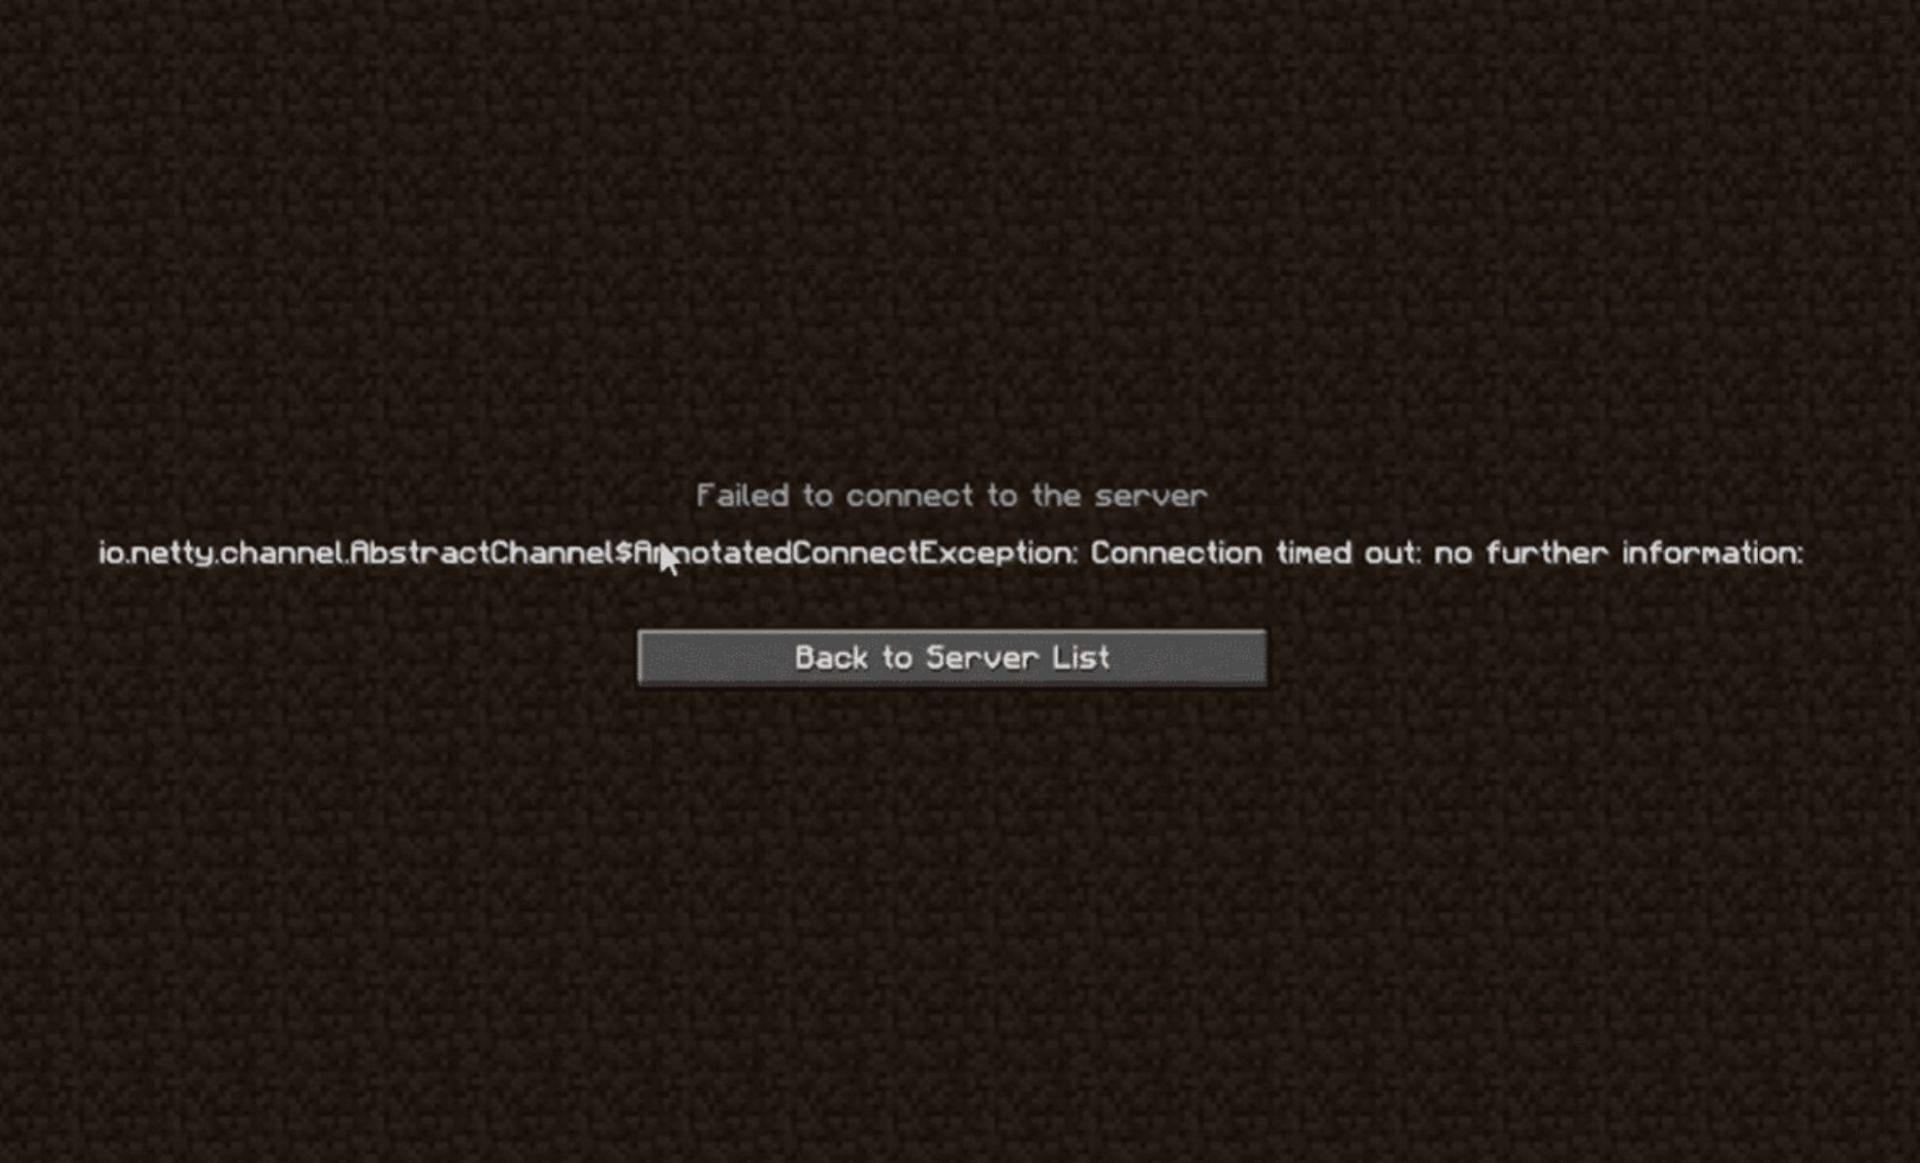 как исправить ошибку fatal error failed to connect with local steam client process фото 66